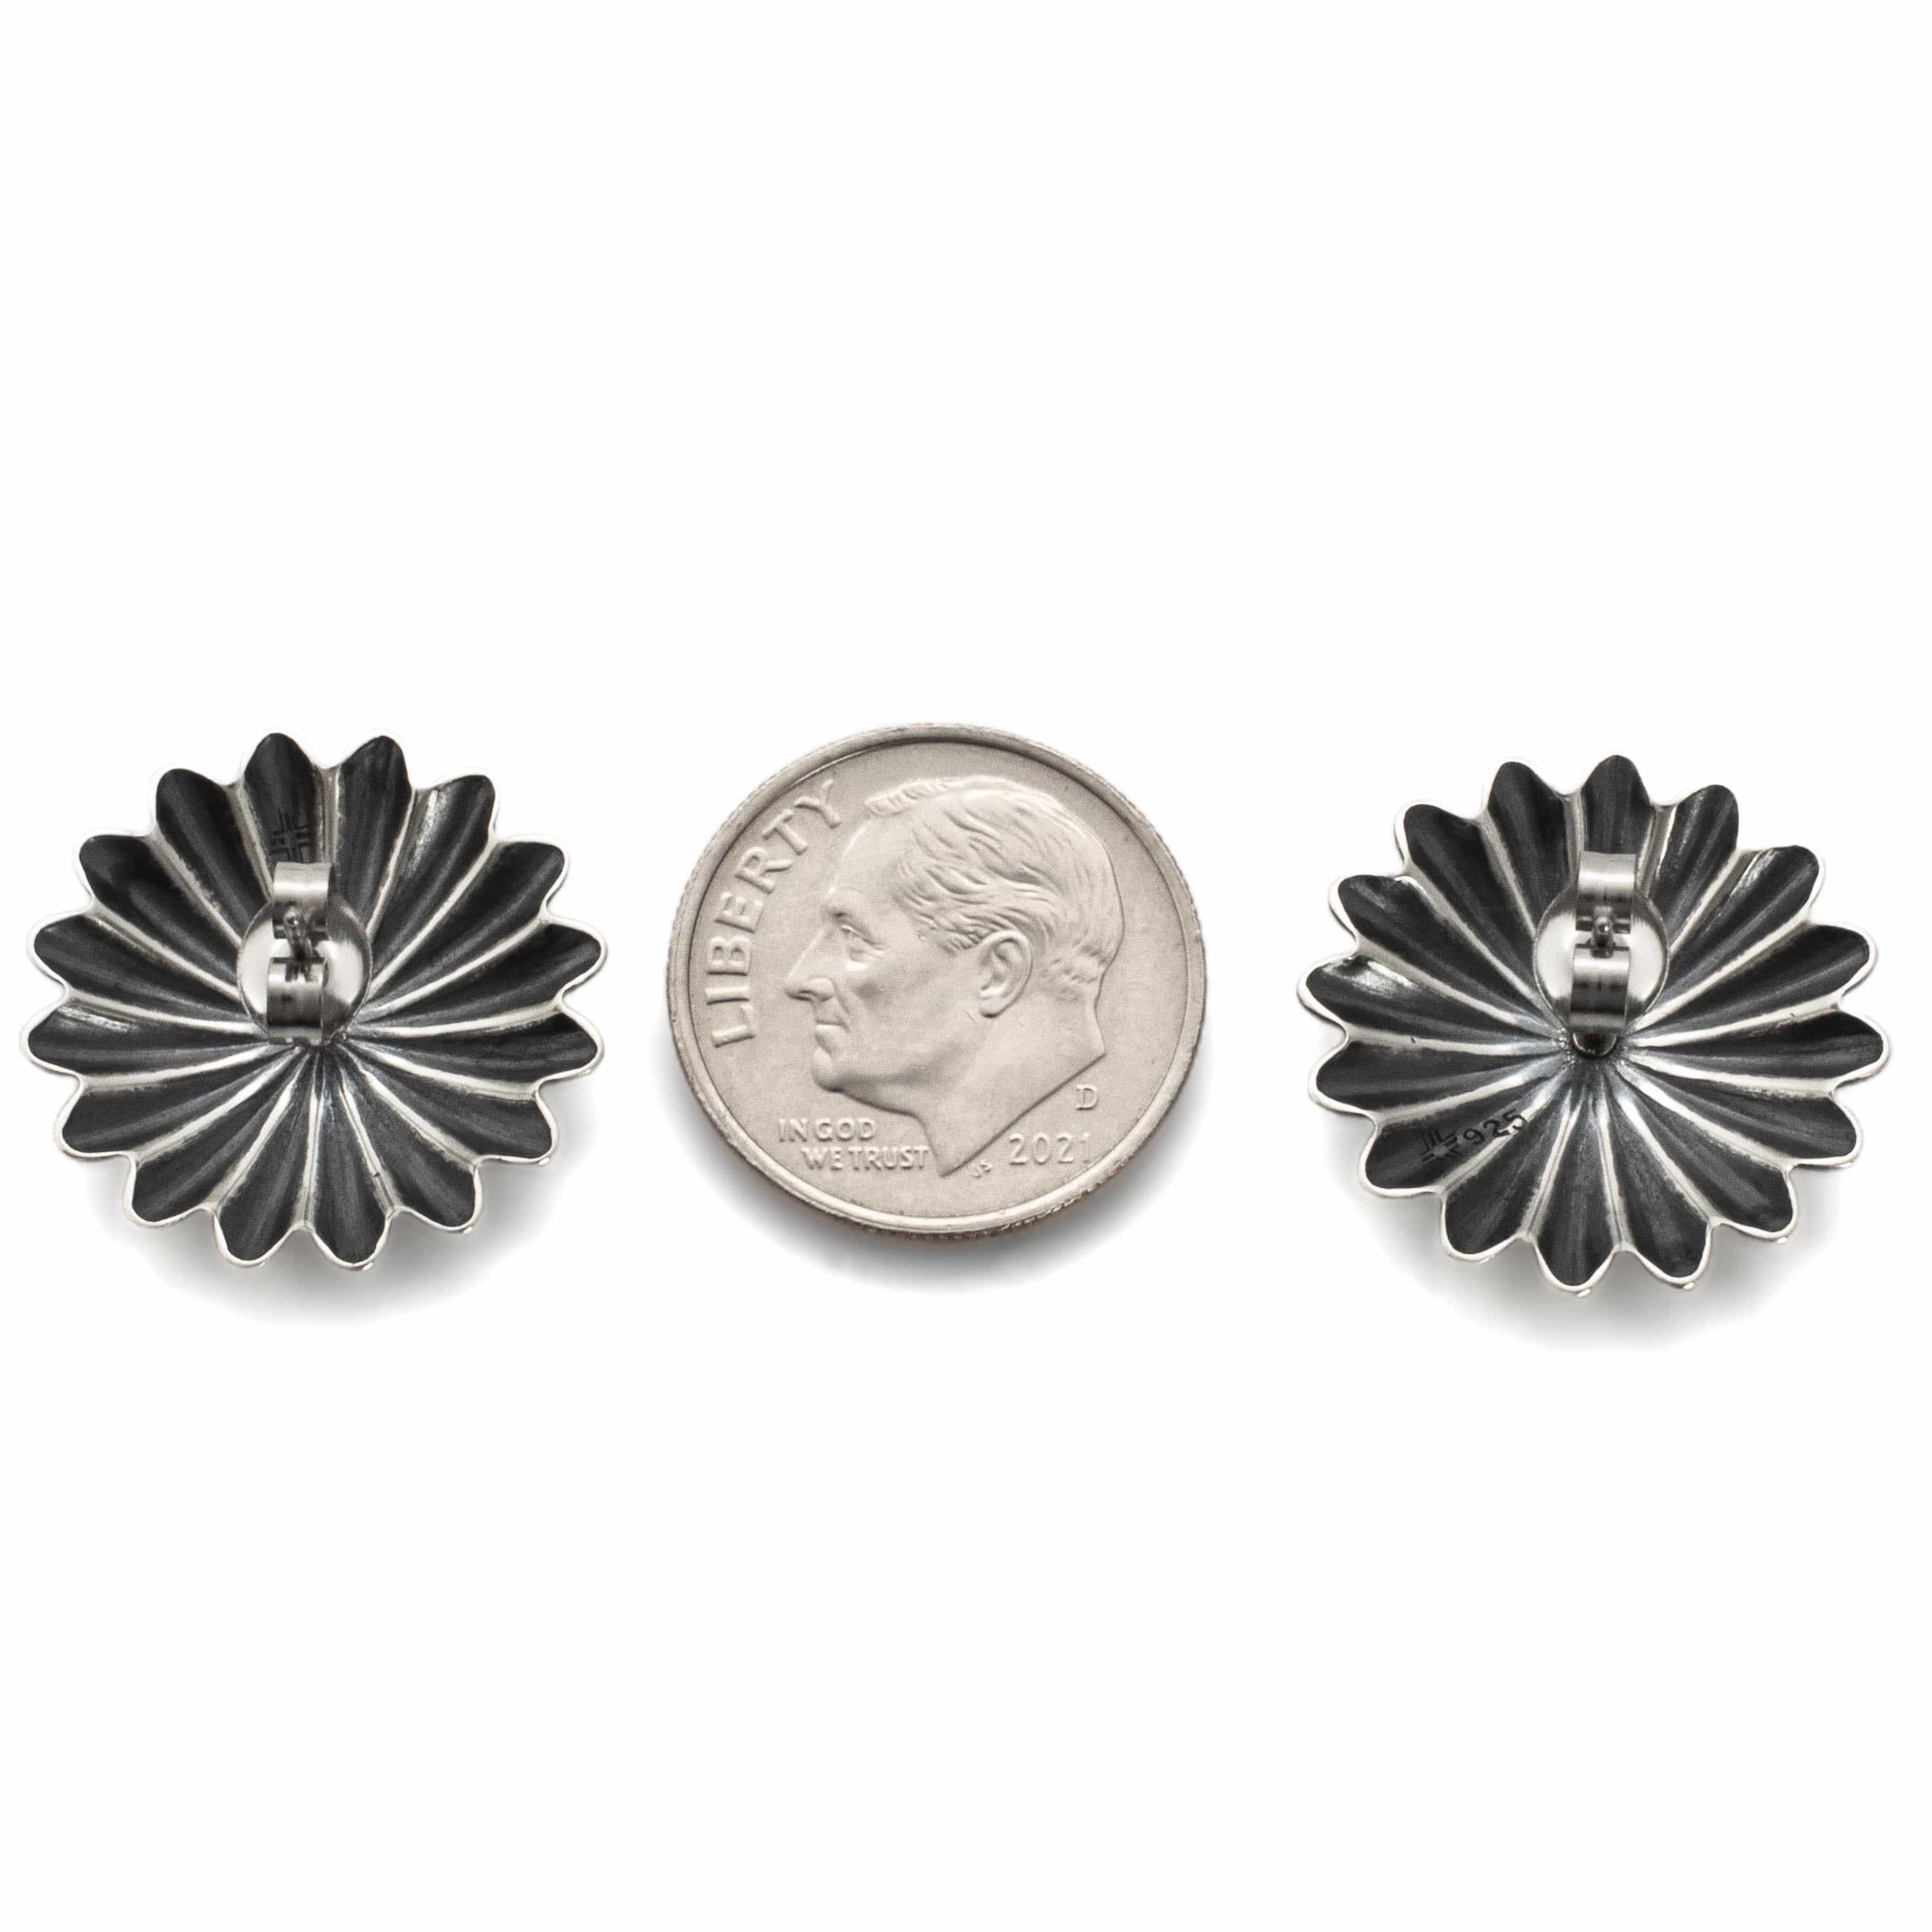 Kalifano Native American Jewelry Flower USA Native American Made Sterling Silver Earrings NAE150.003